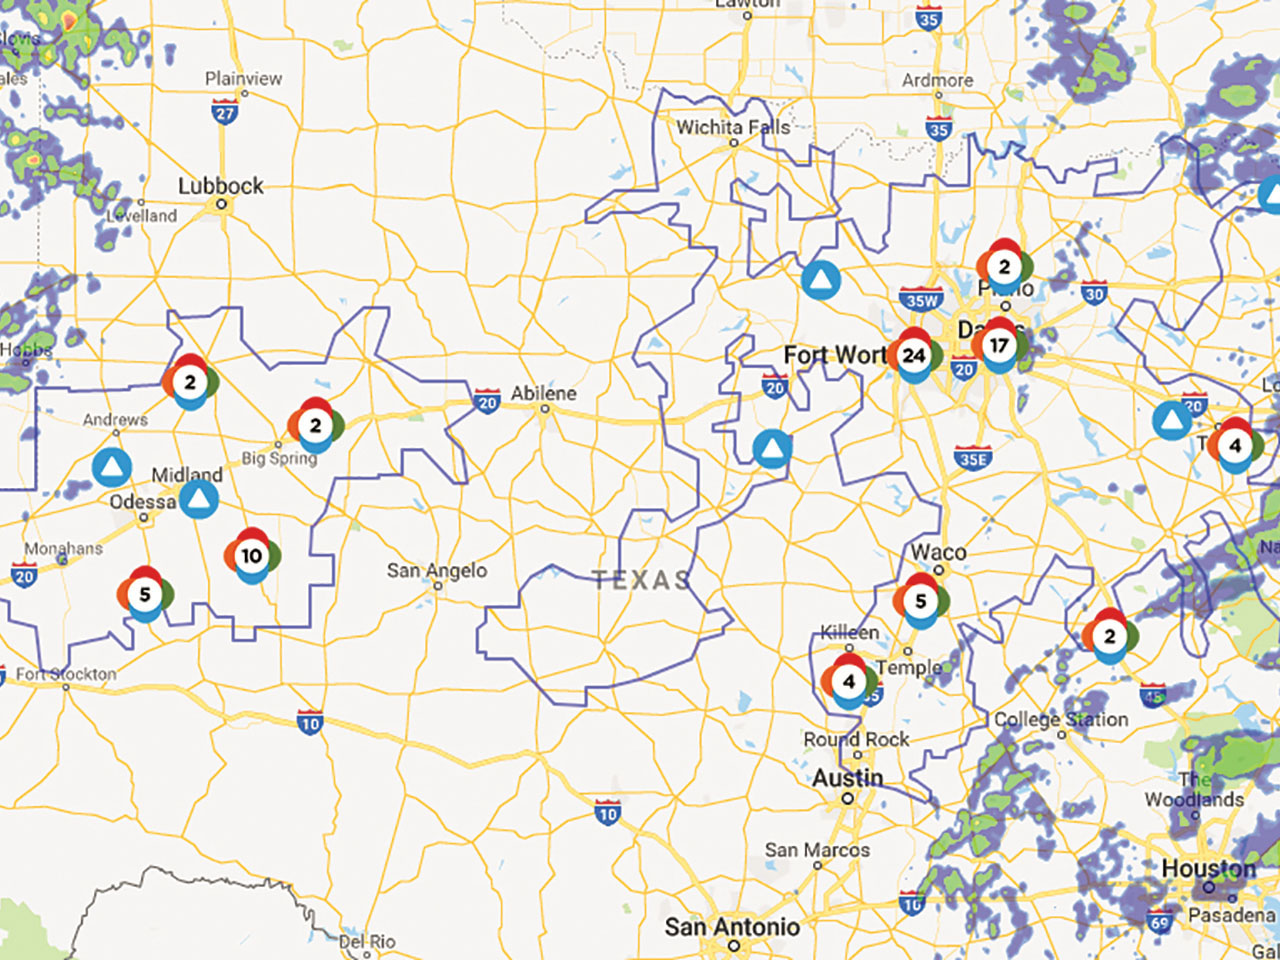 State-of-the-art digital technology allows Oncor to pinpoint outages so power can be restored as quickly as possible.